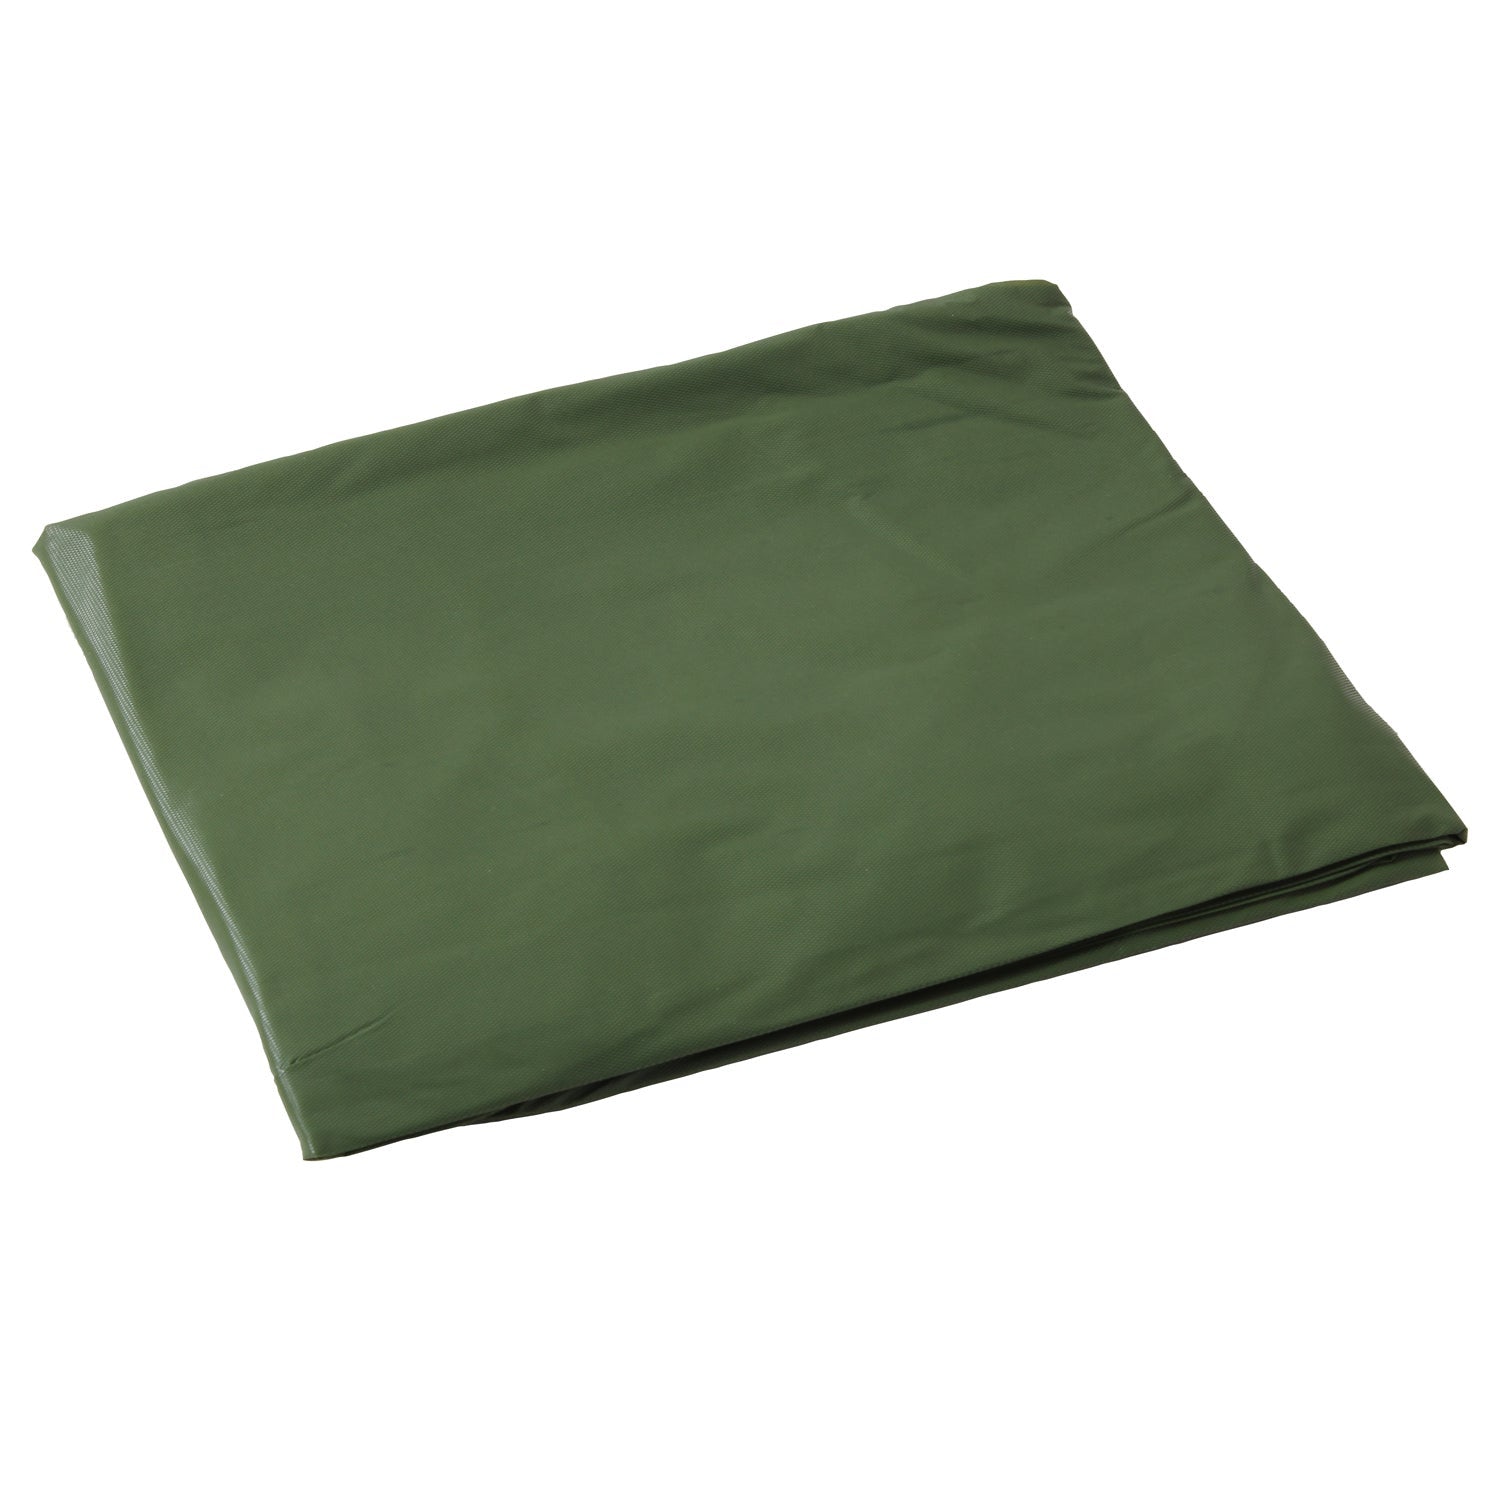 This is by far one of the best value options for money.  Rothco's heat sealed vinyl ponchos provide great protection from wet weather and are easy to store.